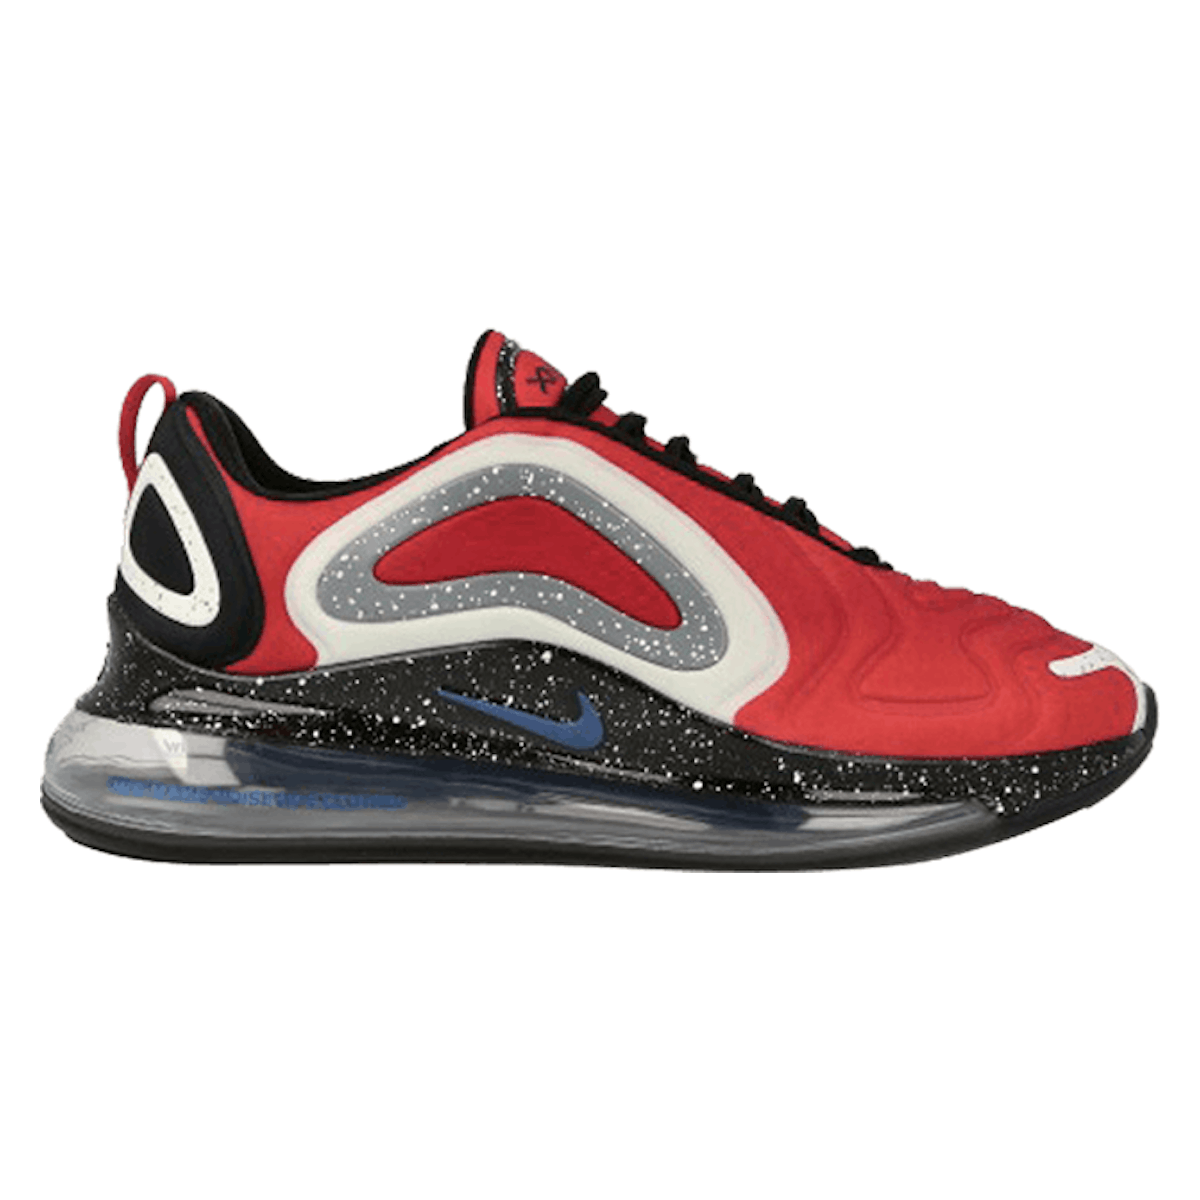 Undercover x Nike Air Max 720 "University Red"